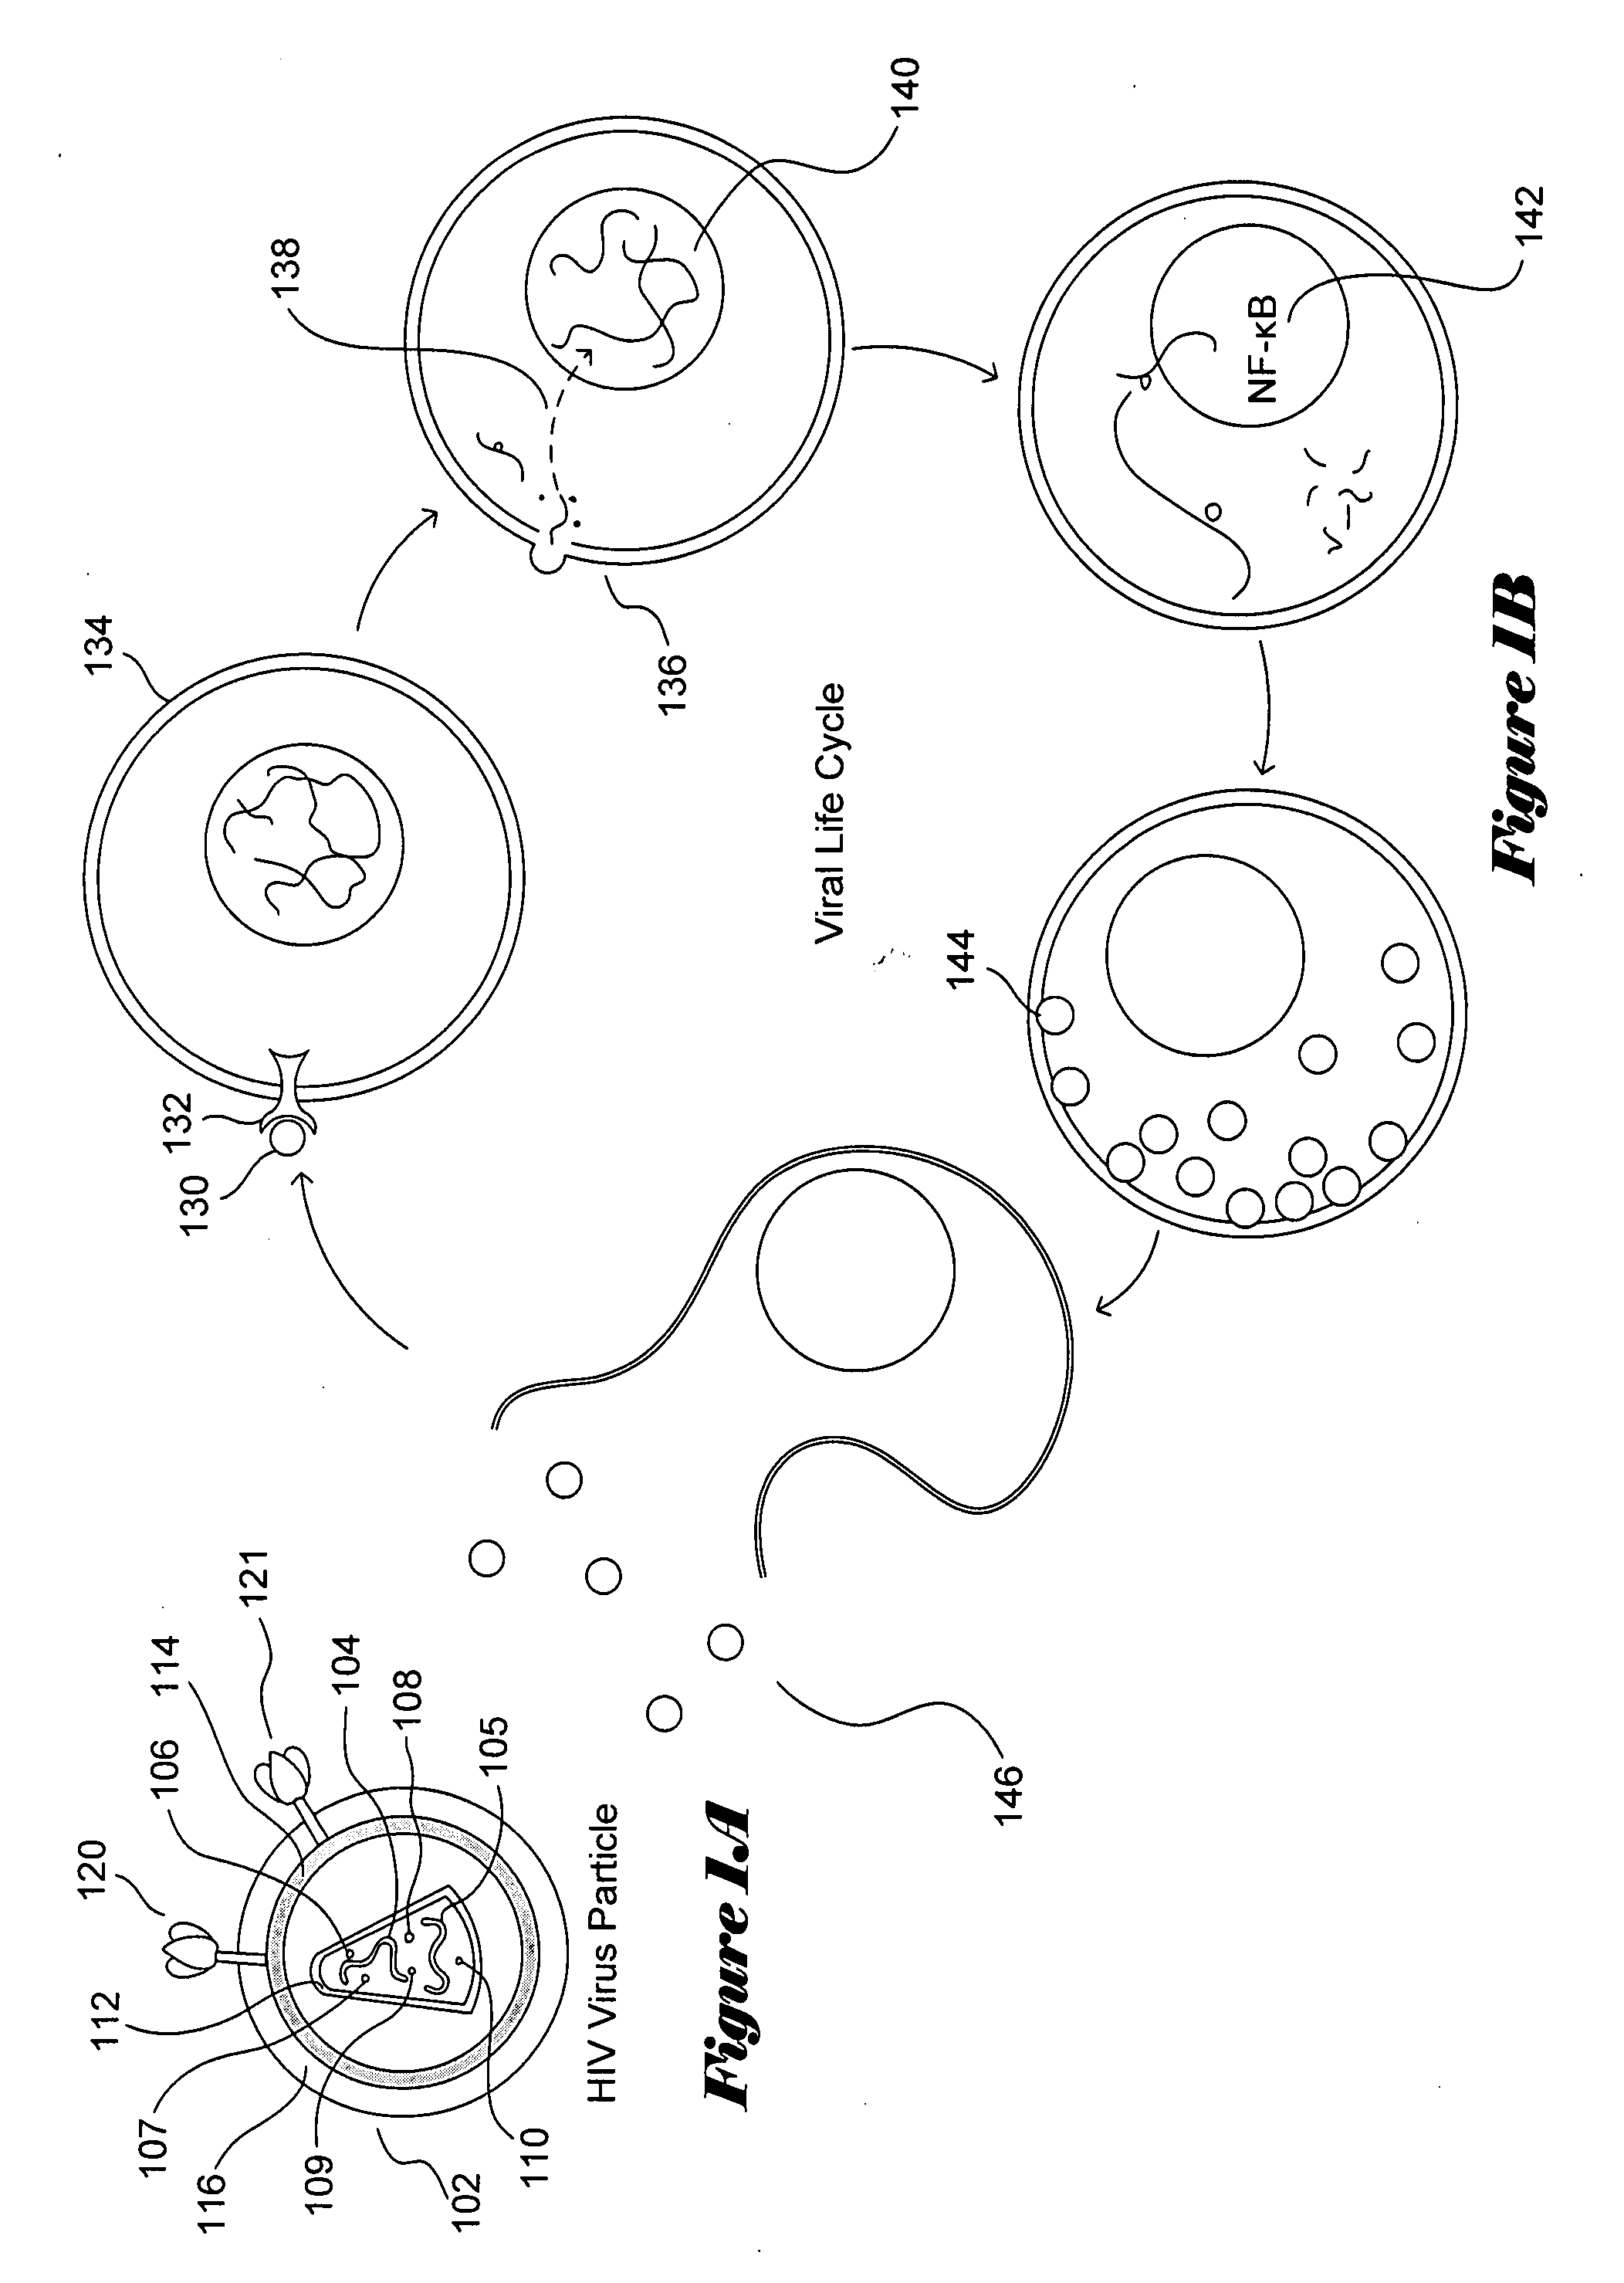 Conserved-element vaccines and methods for designing conserved-element vaccines